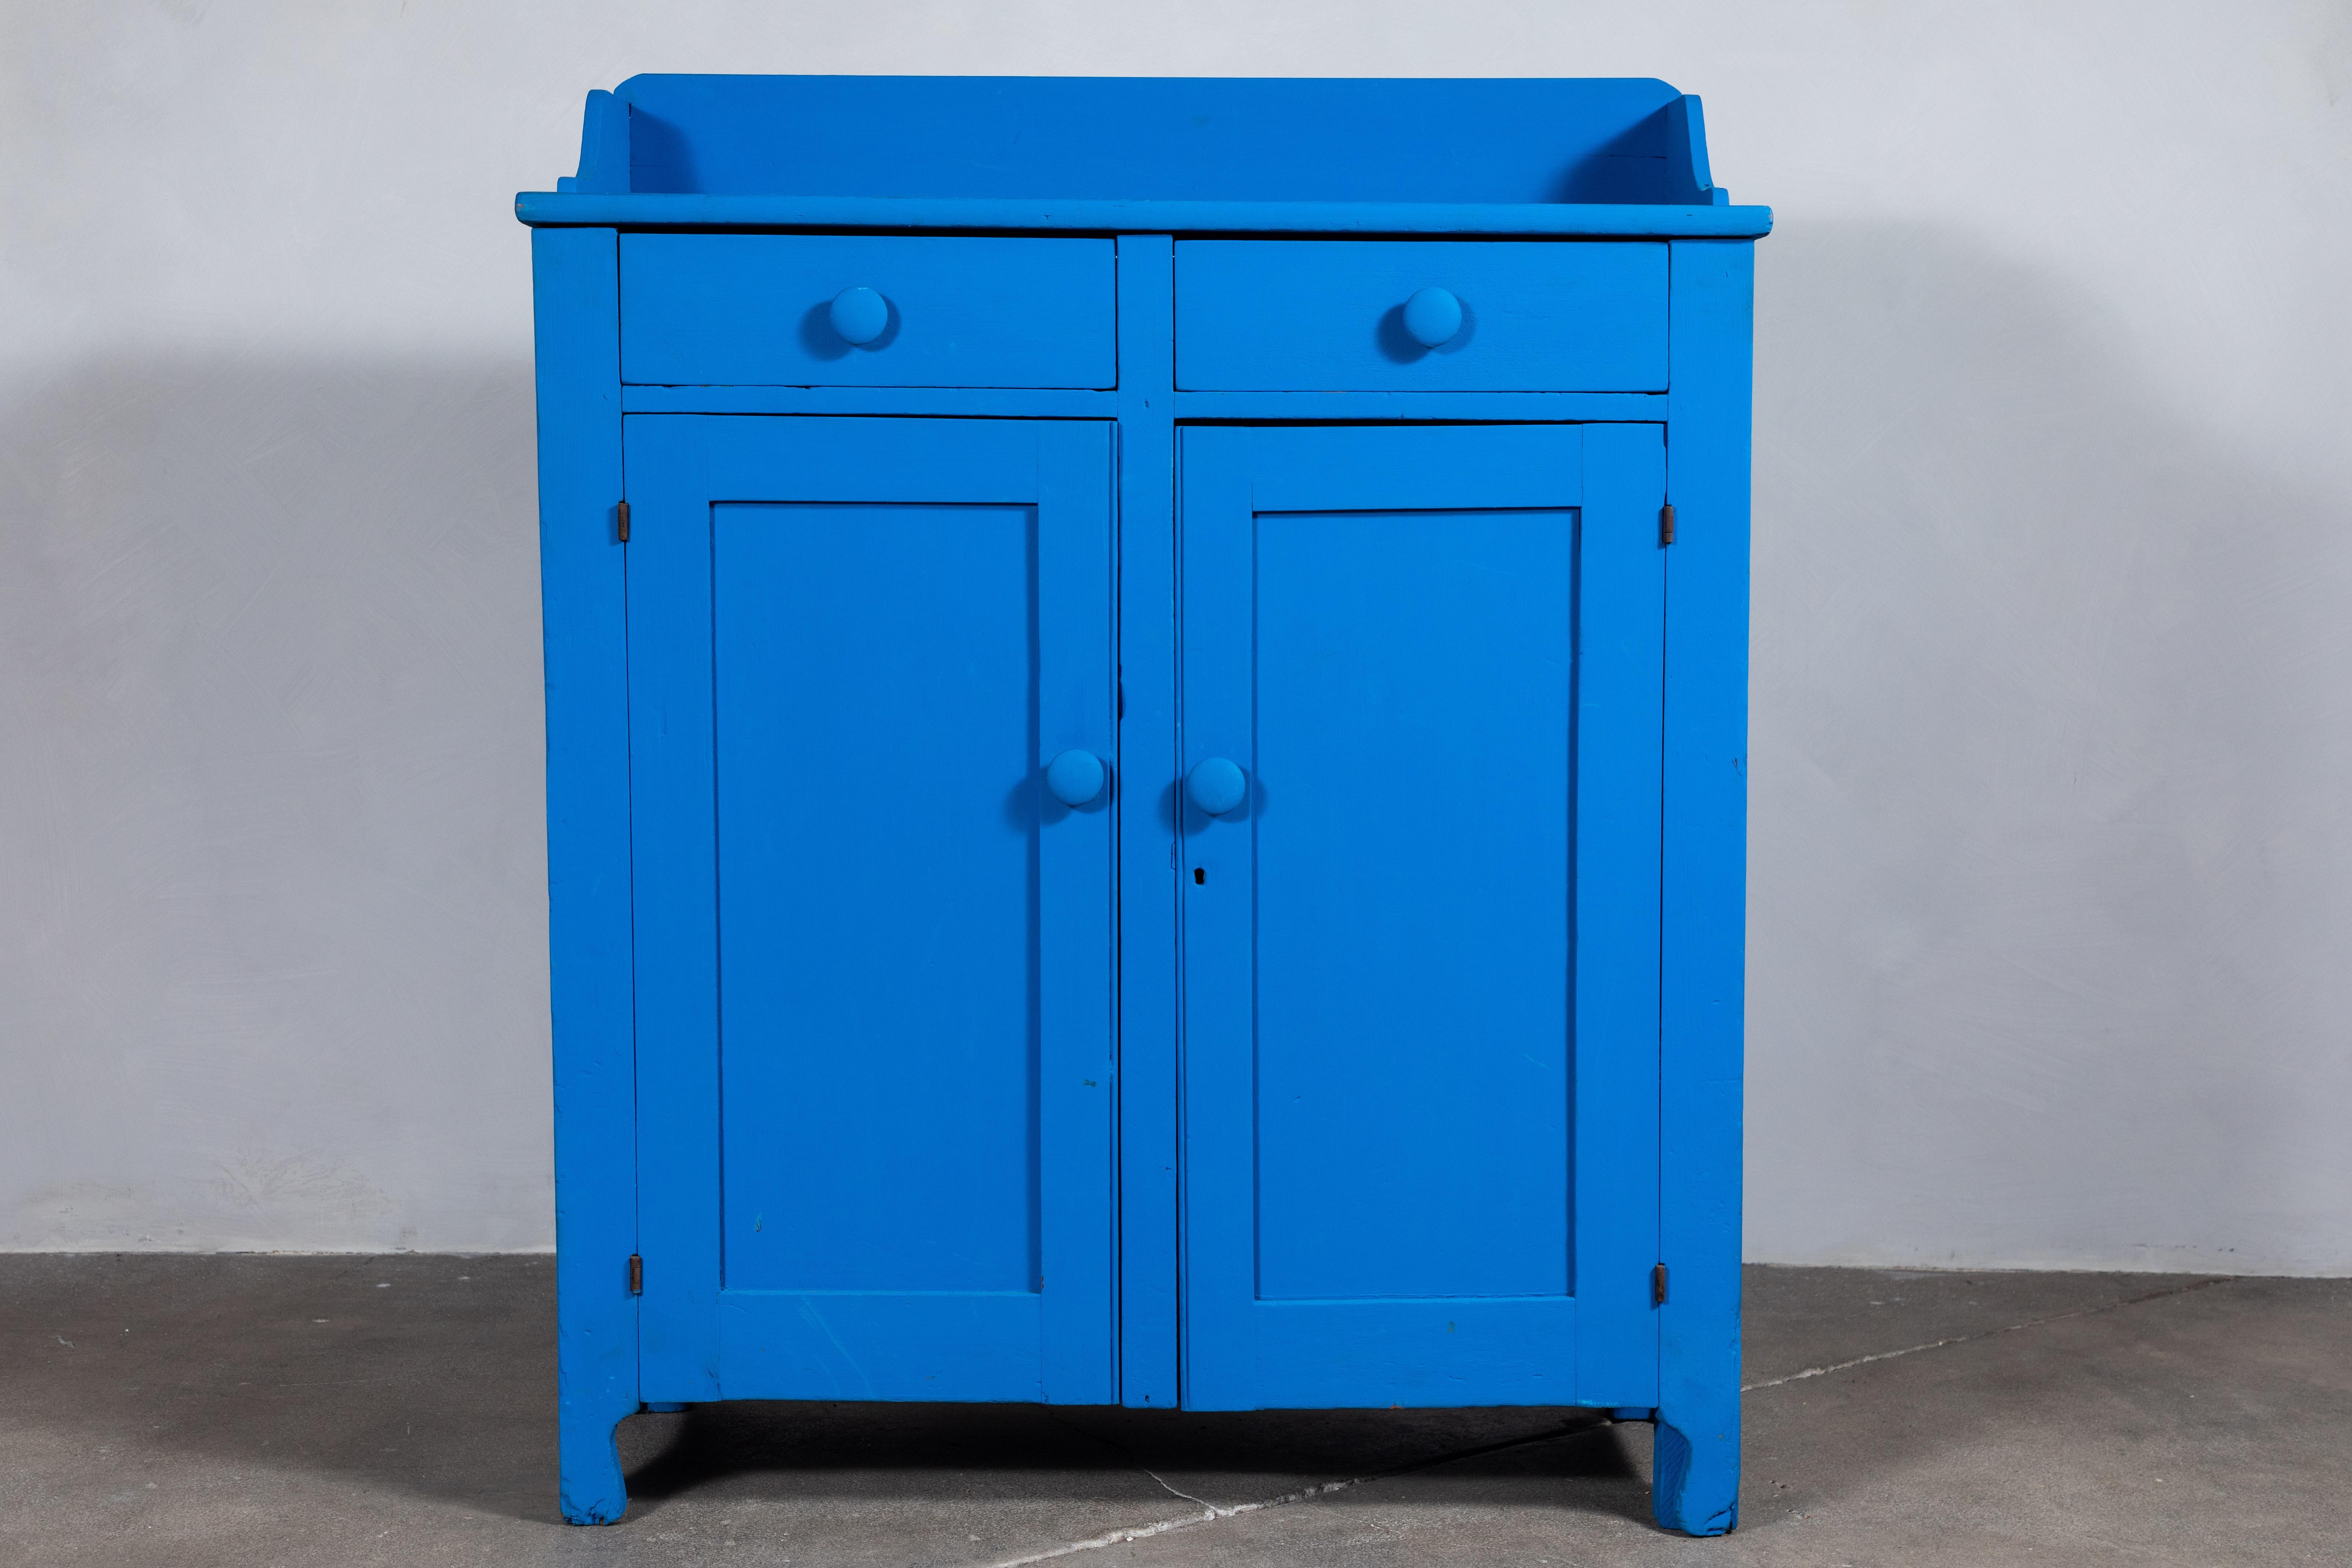 Early American jelly cabinet newly repainted in a vibrant blue. The jelly cabinet offers two top drawers with two lower doors.